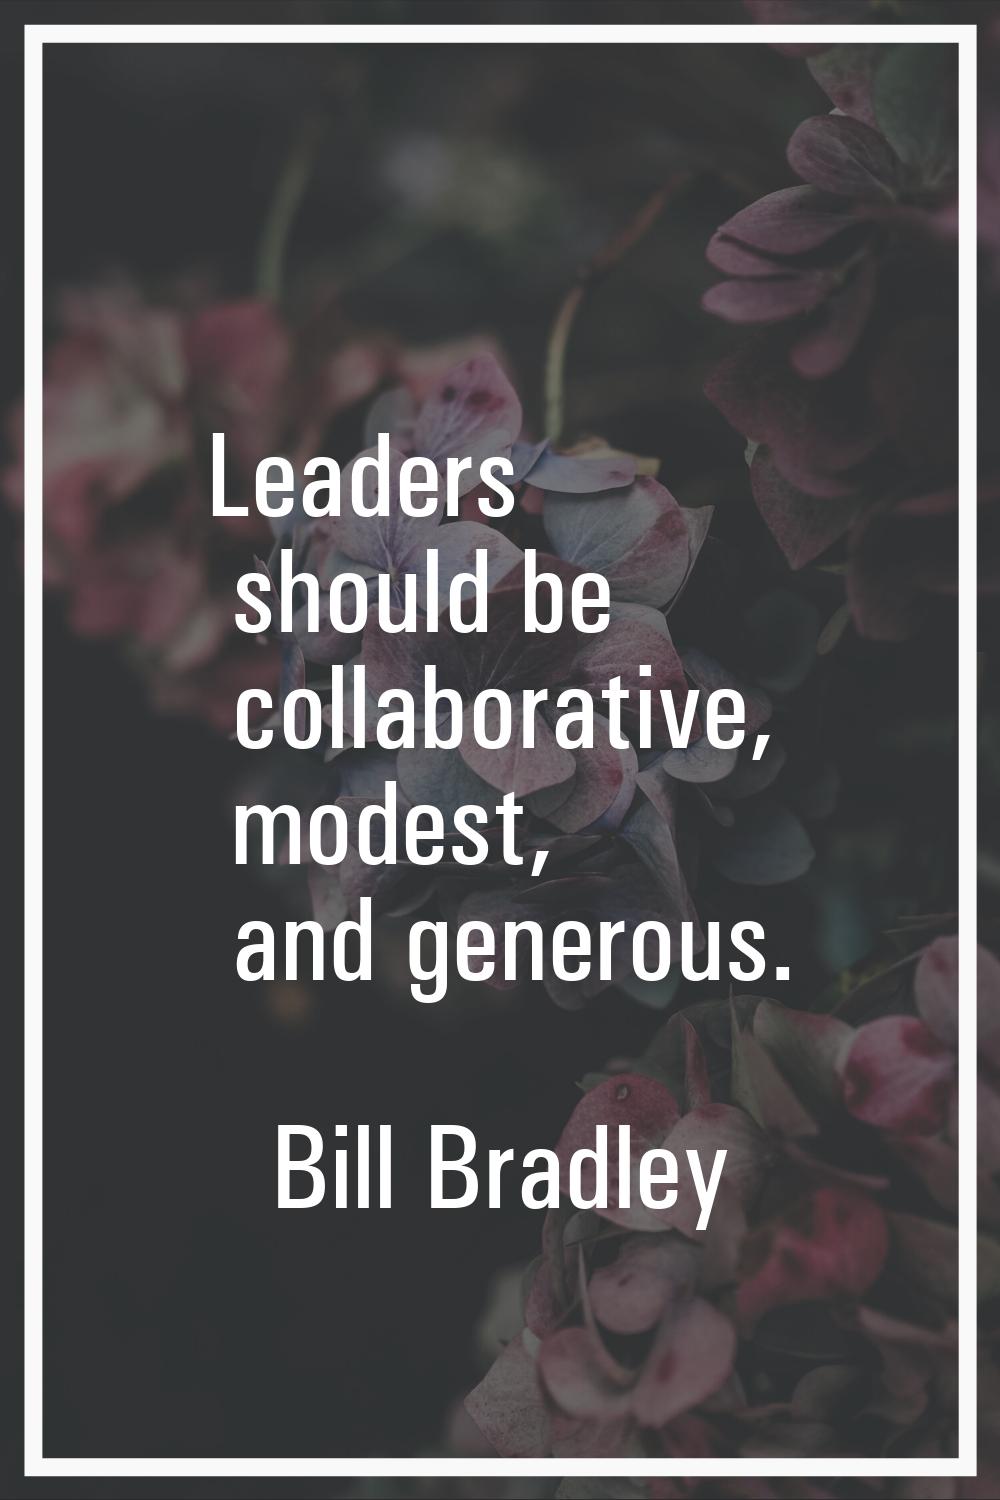 Leaders should be collaborative, modest, and generous.